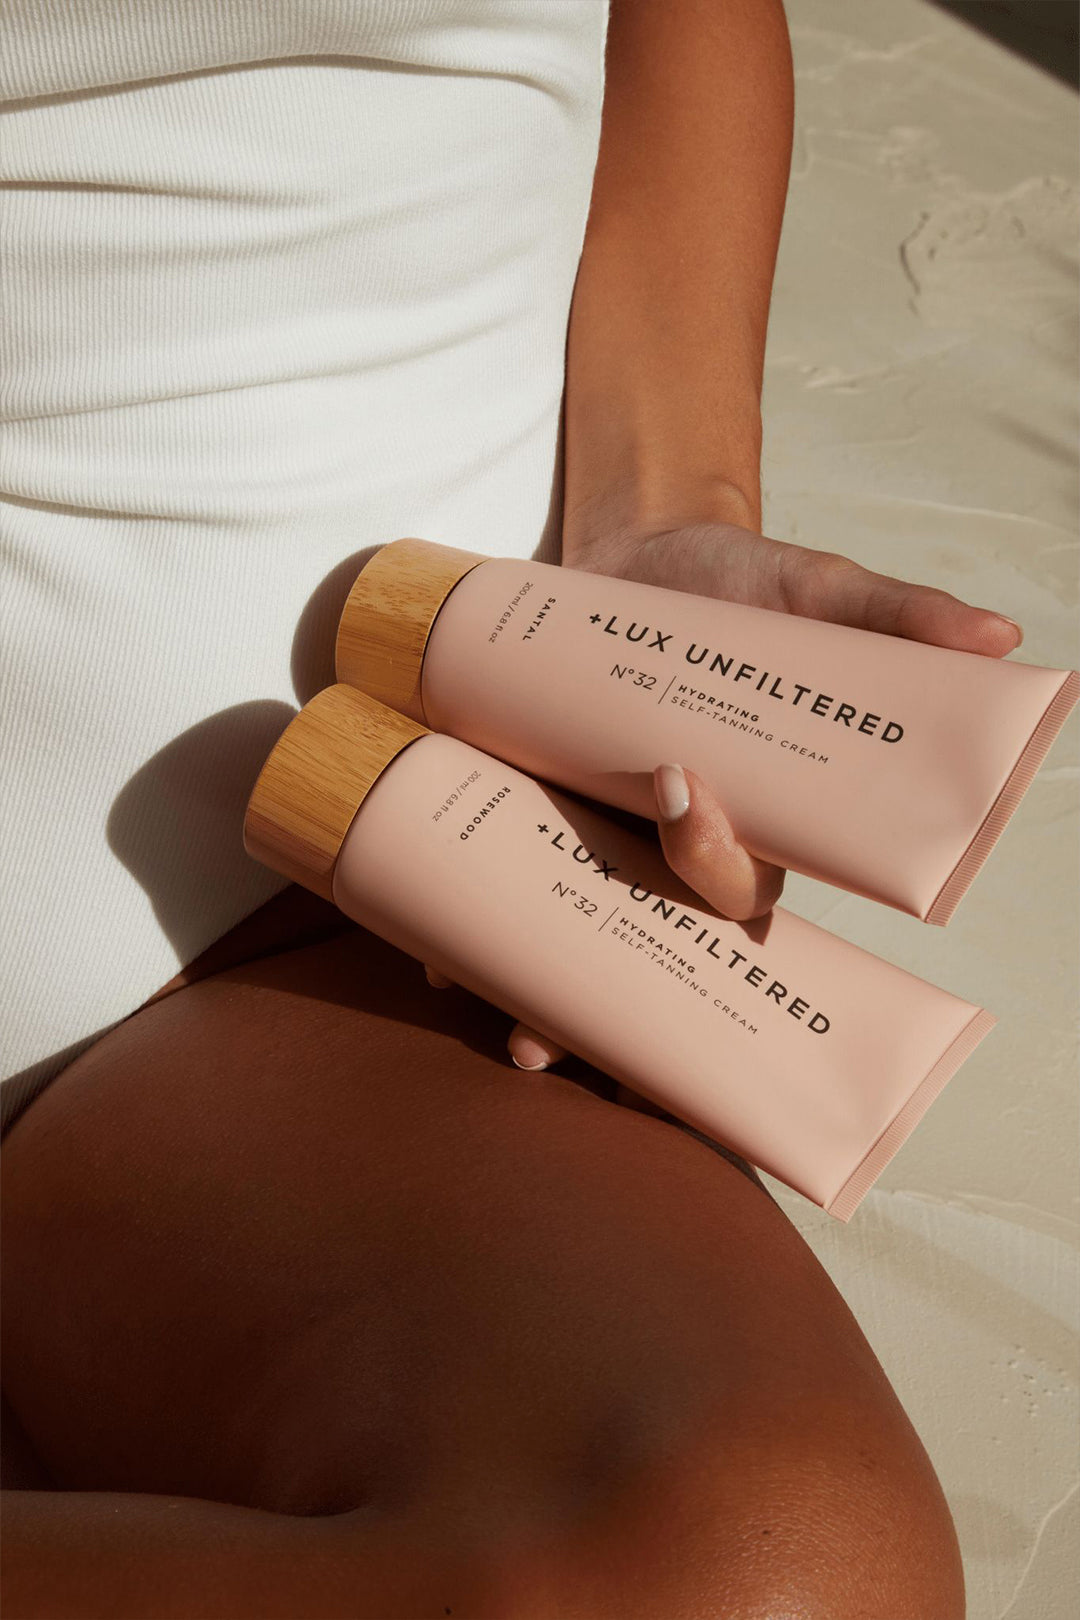 N°32 Original Hydrating Self-Tanning Cream - + LUX UNFILTERED